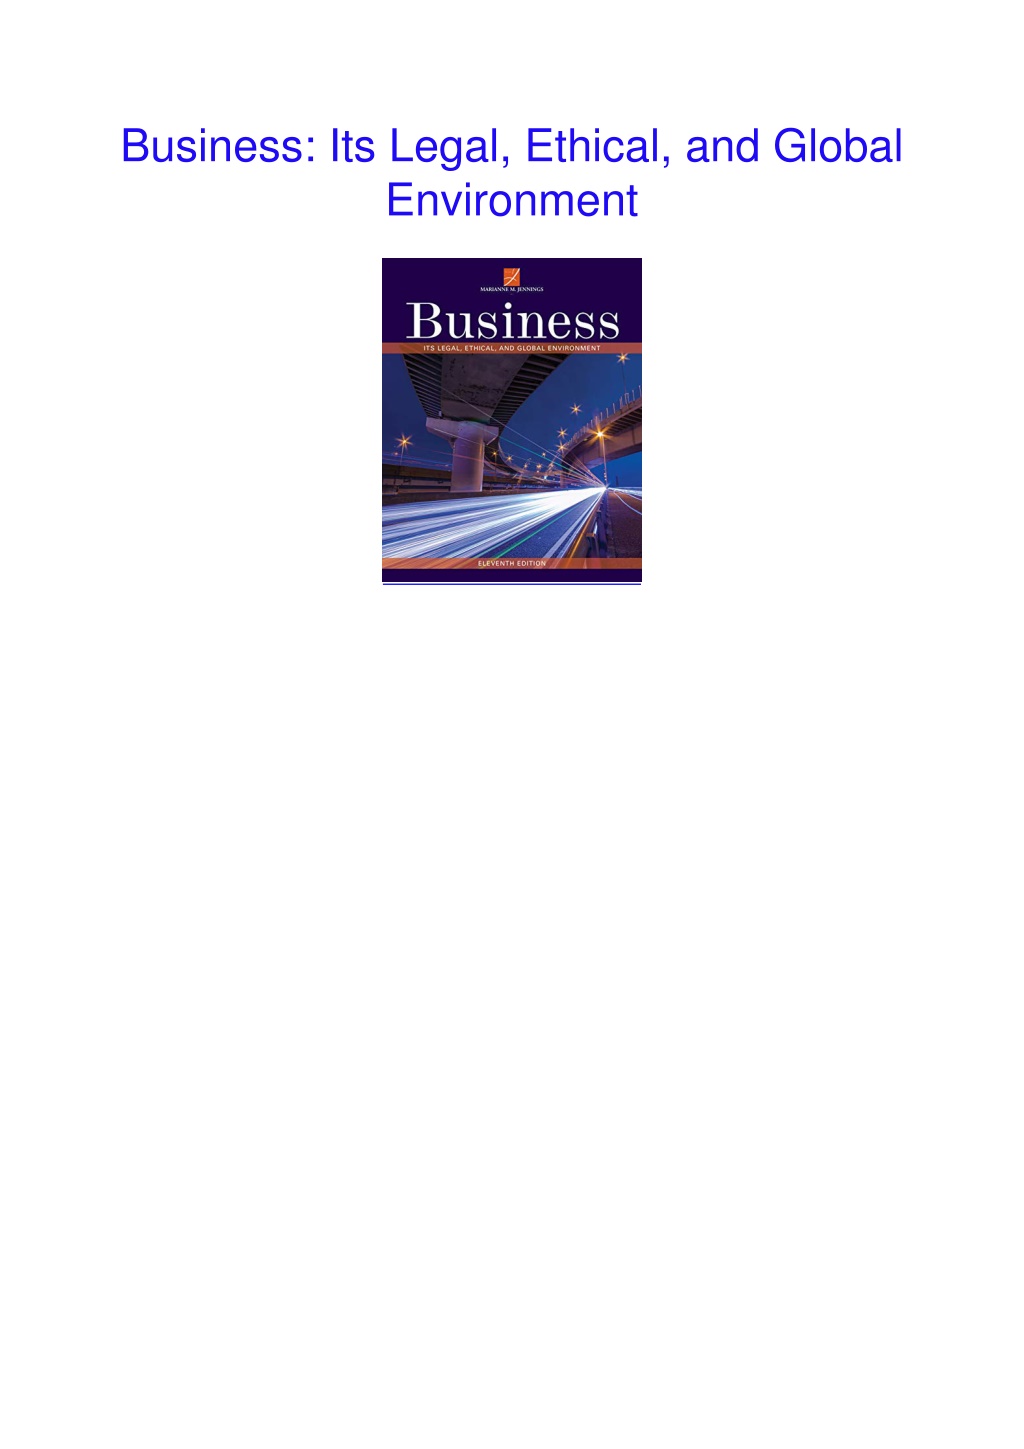 PPT - Epub Business: Its Legal, Ethical, and Global Environment